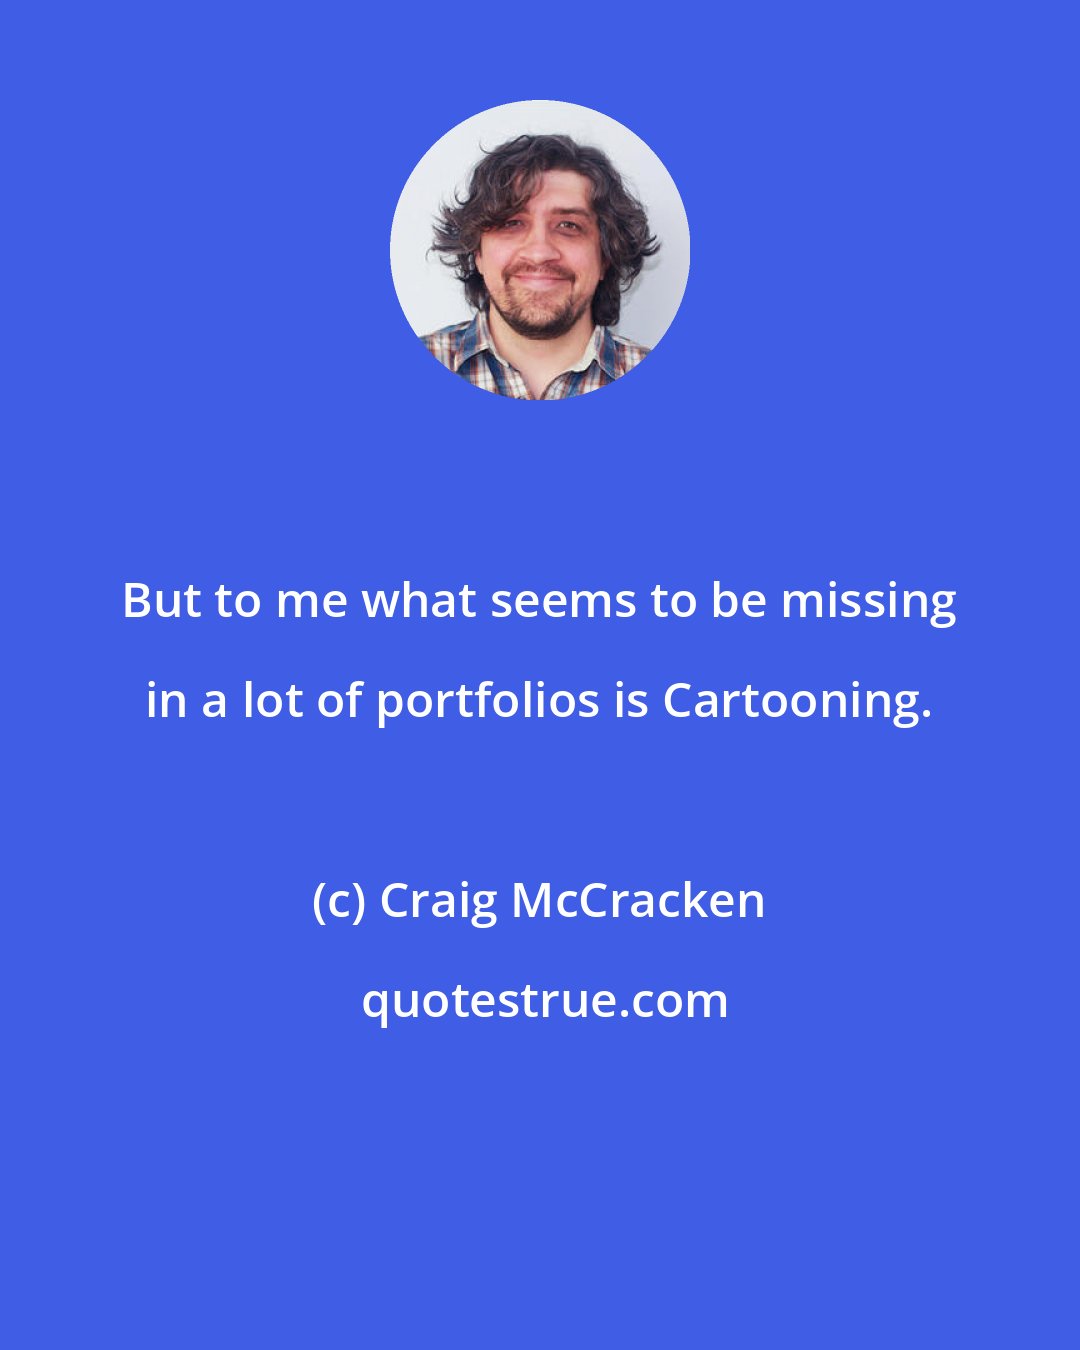 Craig McCracken: But to me what seems to be missing in a lot of portfolios is Cartooning.